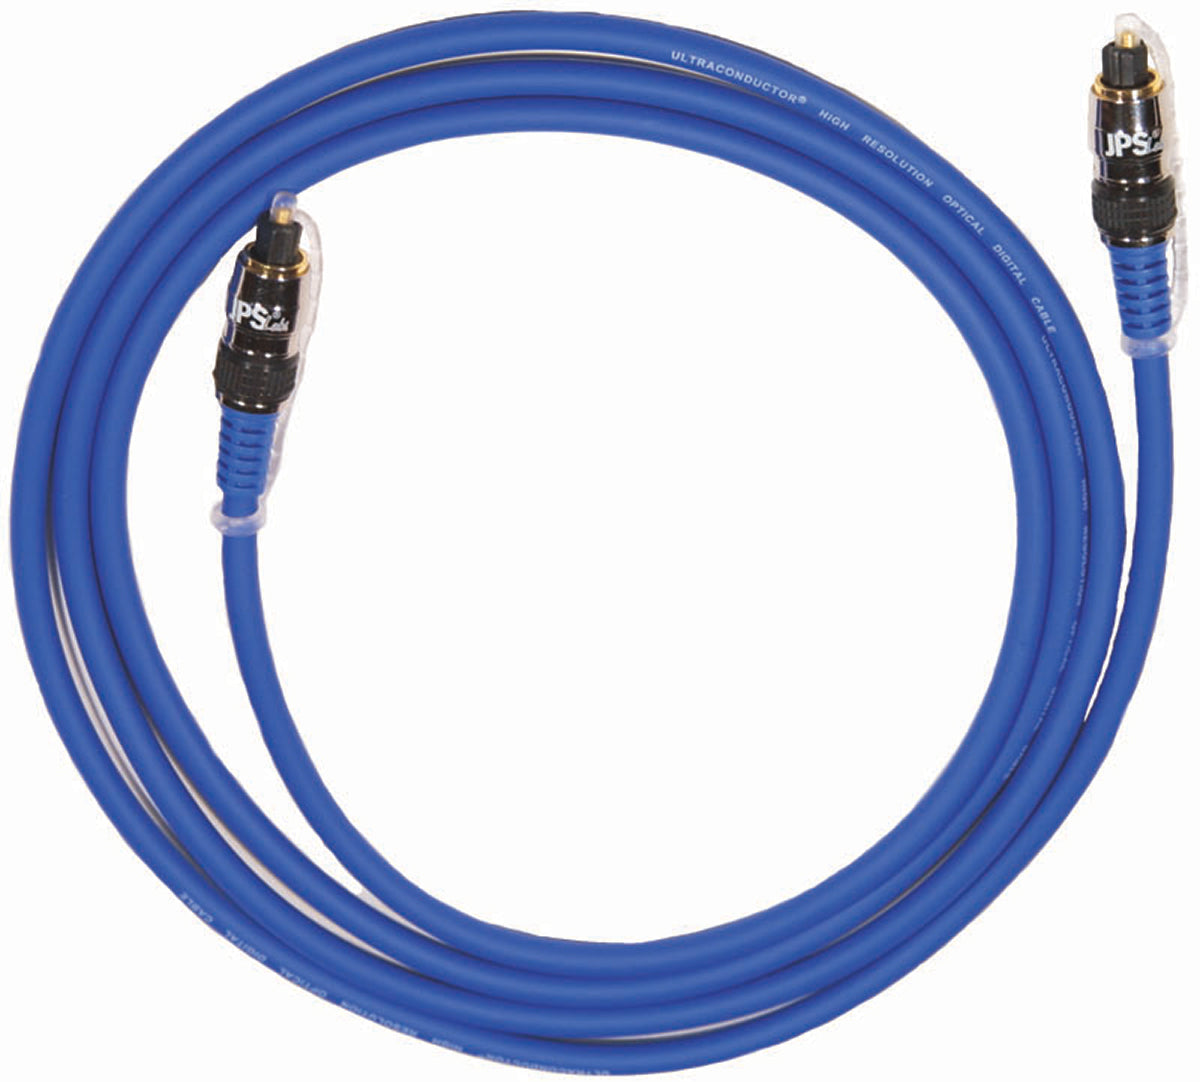 Cable óptico JPS Labs UltraConductor 2 Toslink